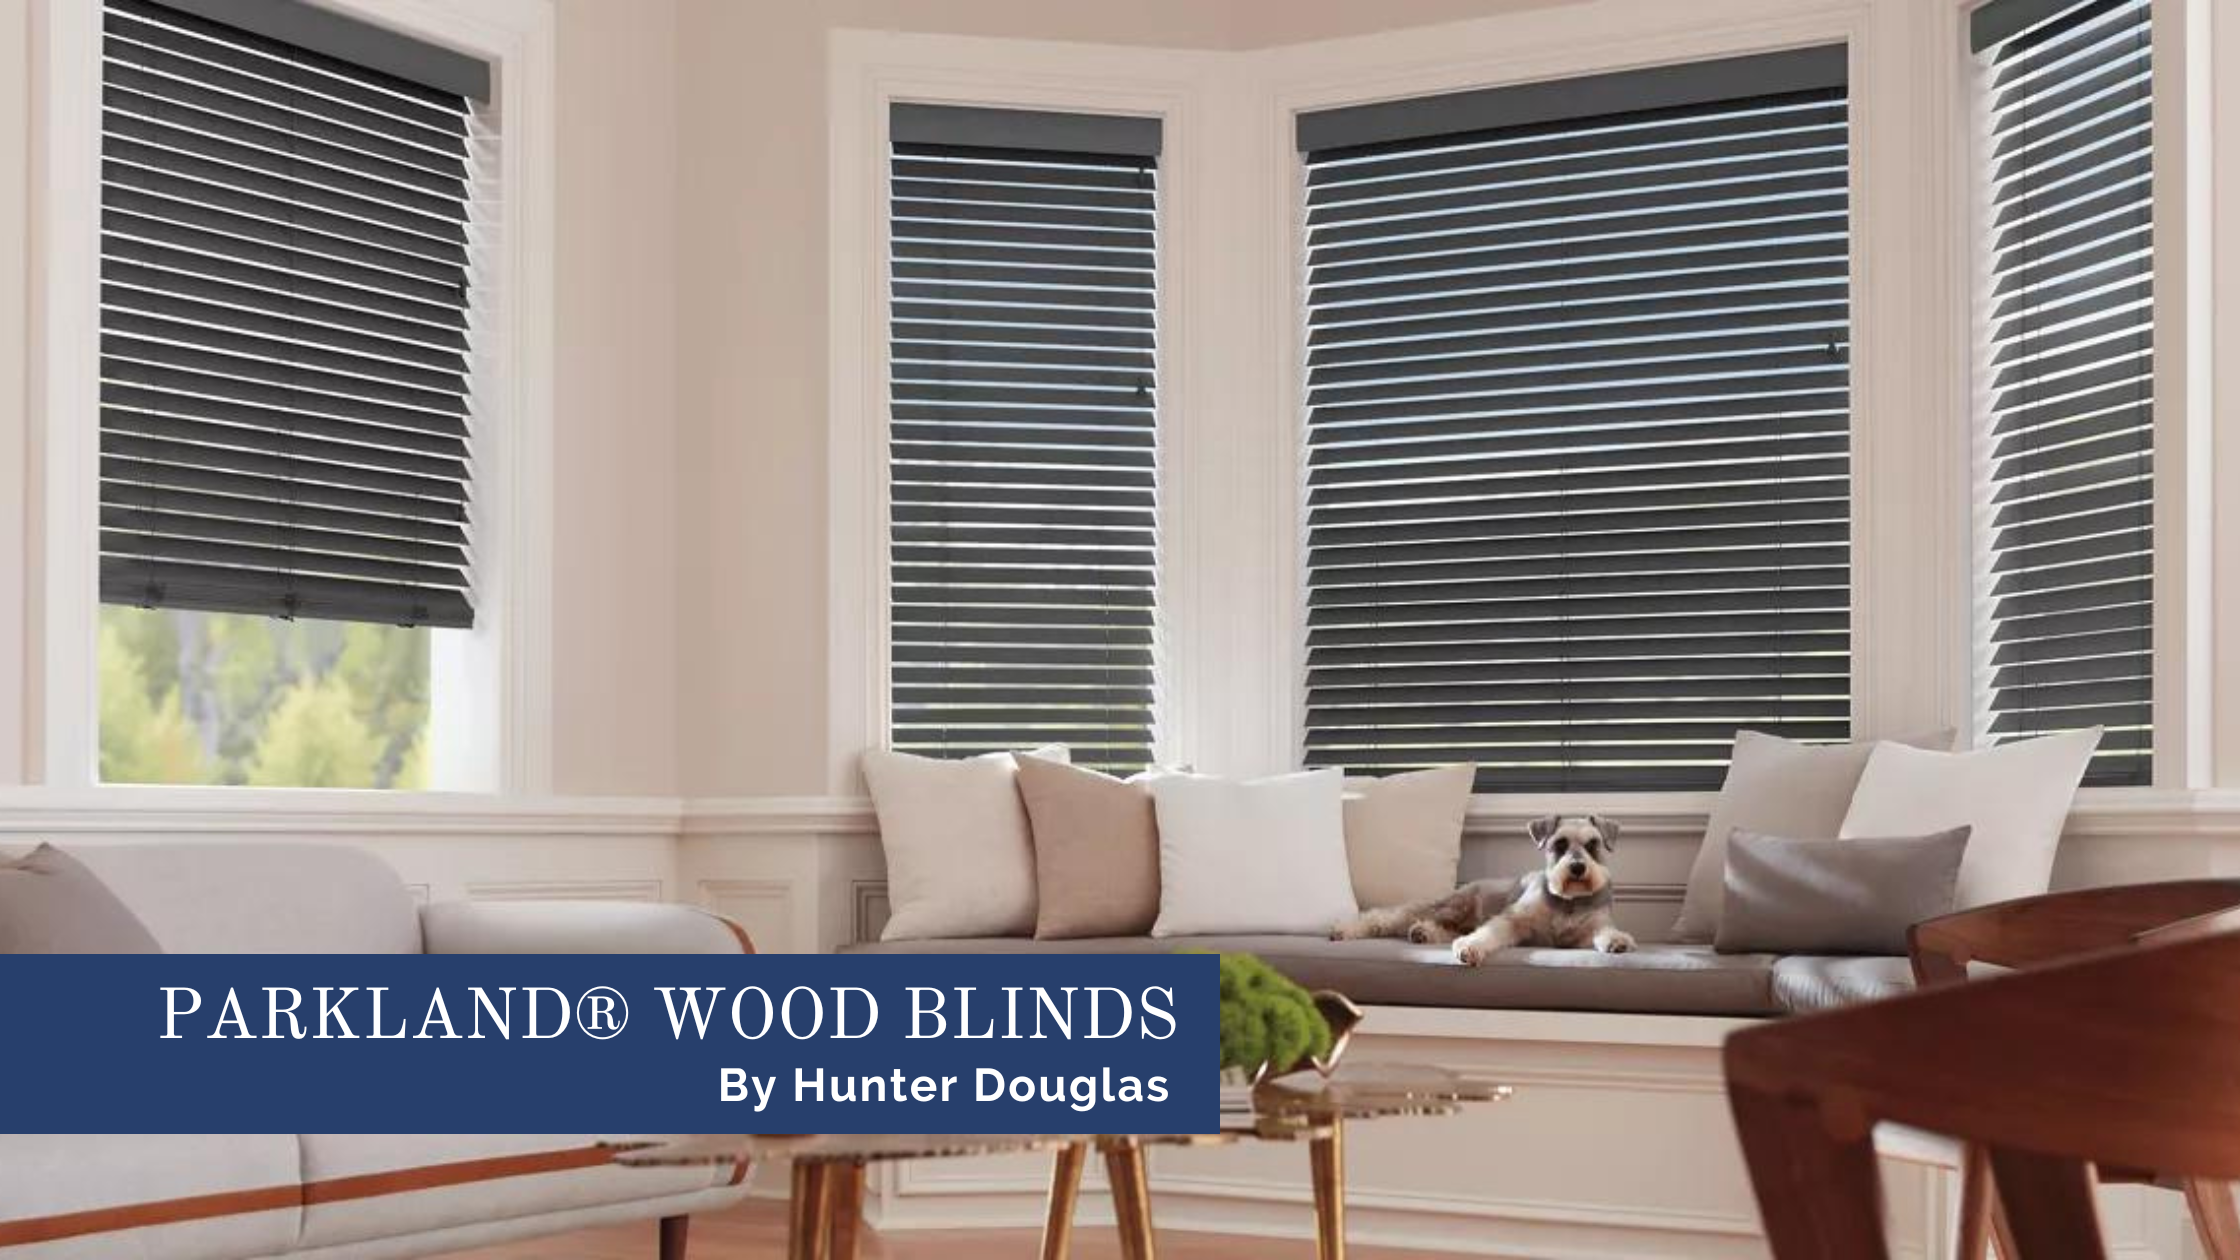 Hunter Douglas Parkland® Wood Blinds at JC Licht near Chicago, Illinois (IL) and Midwest 